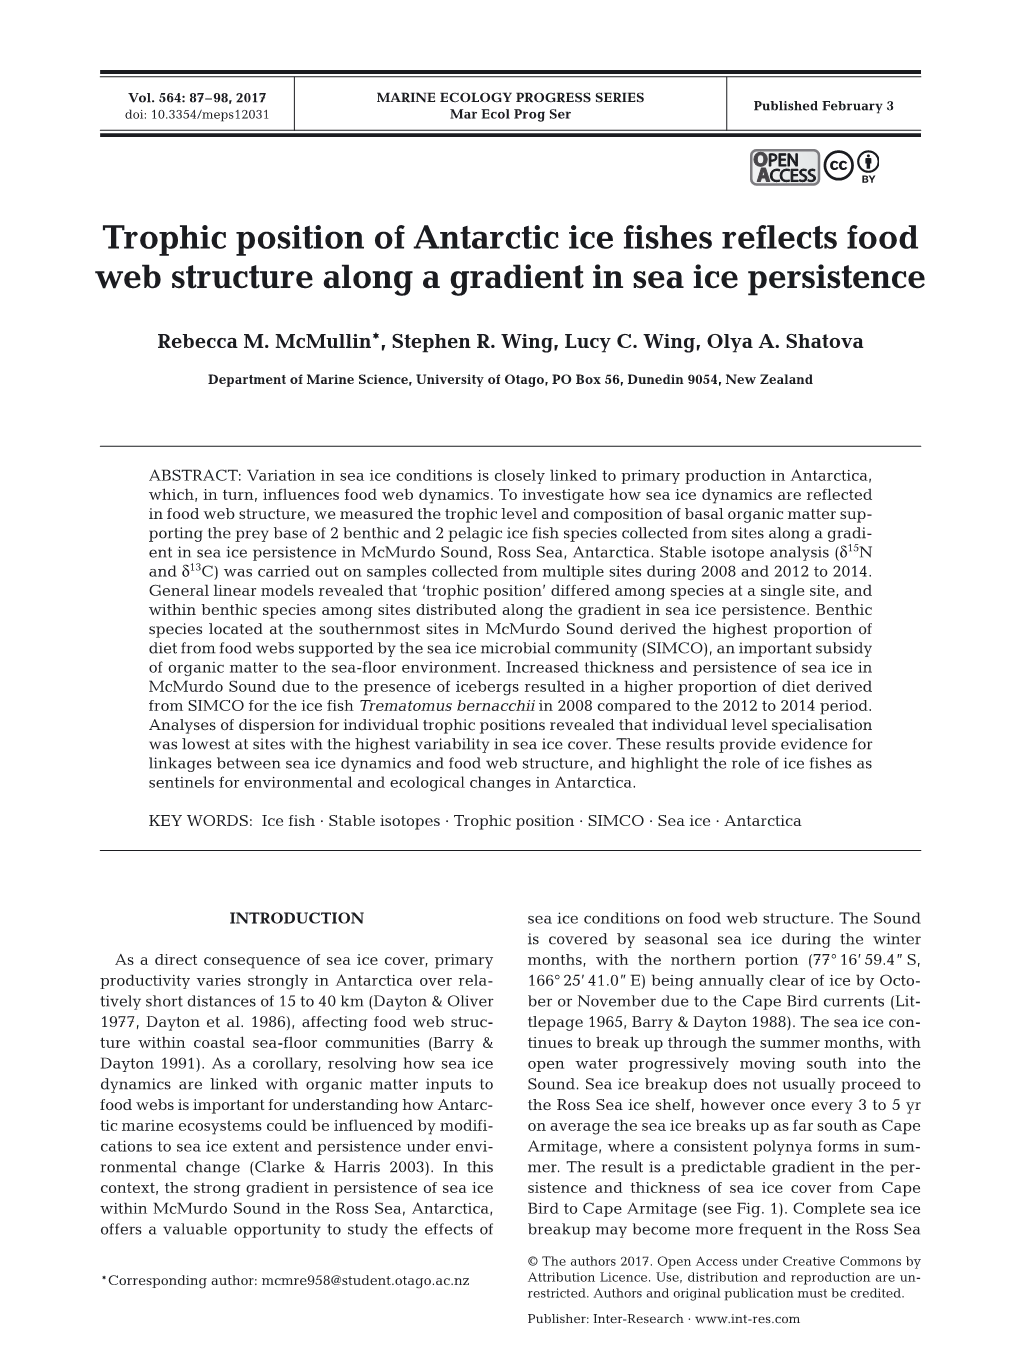 Trophic Position of Antarctic Ice Fishes Reflects Food Web Structure Along a Gradient in Sea Ice Persistence